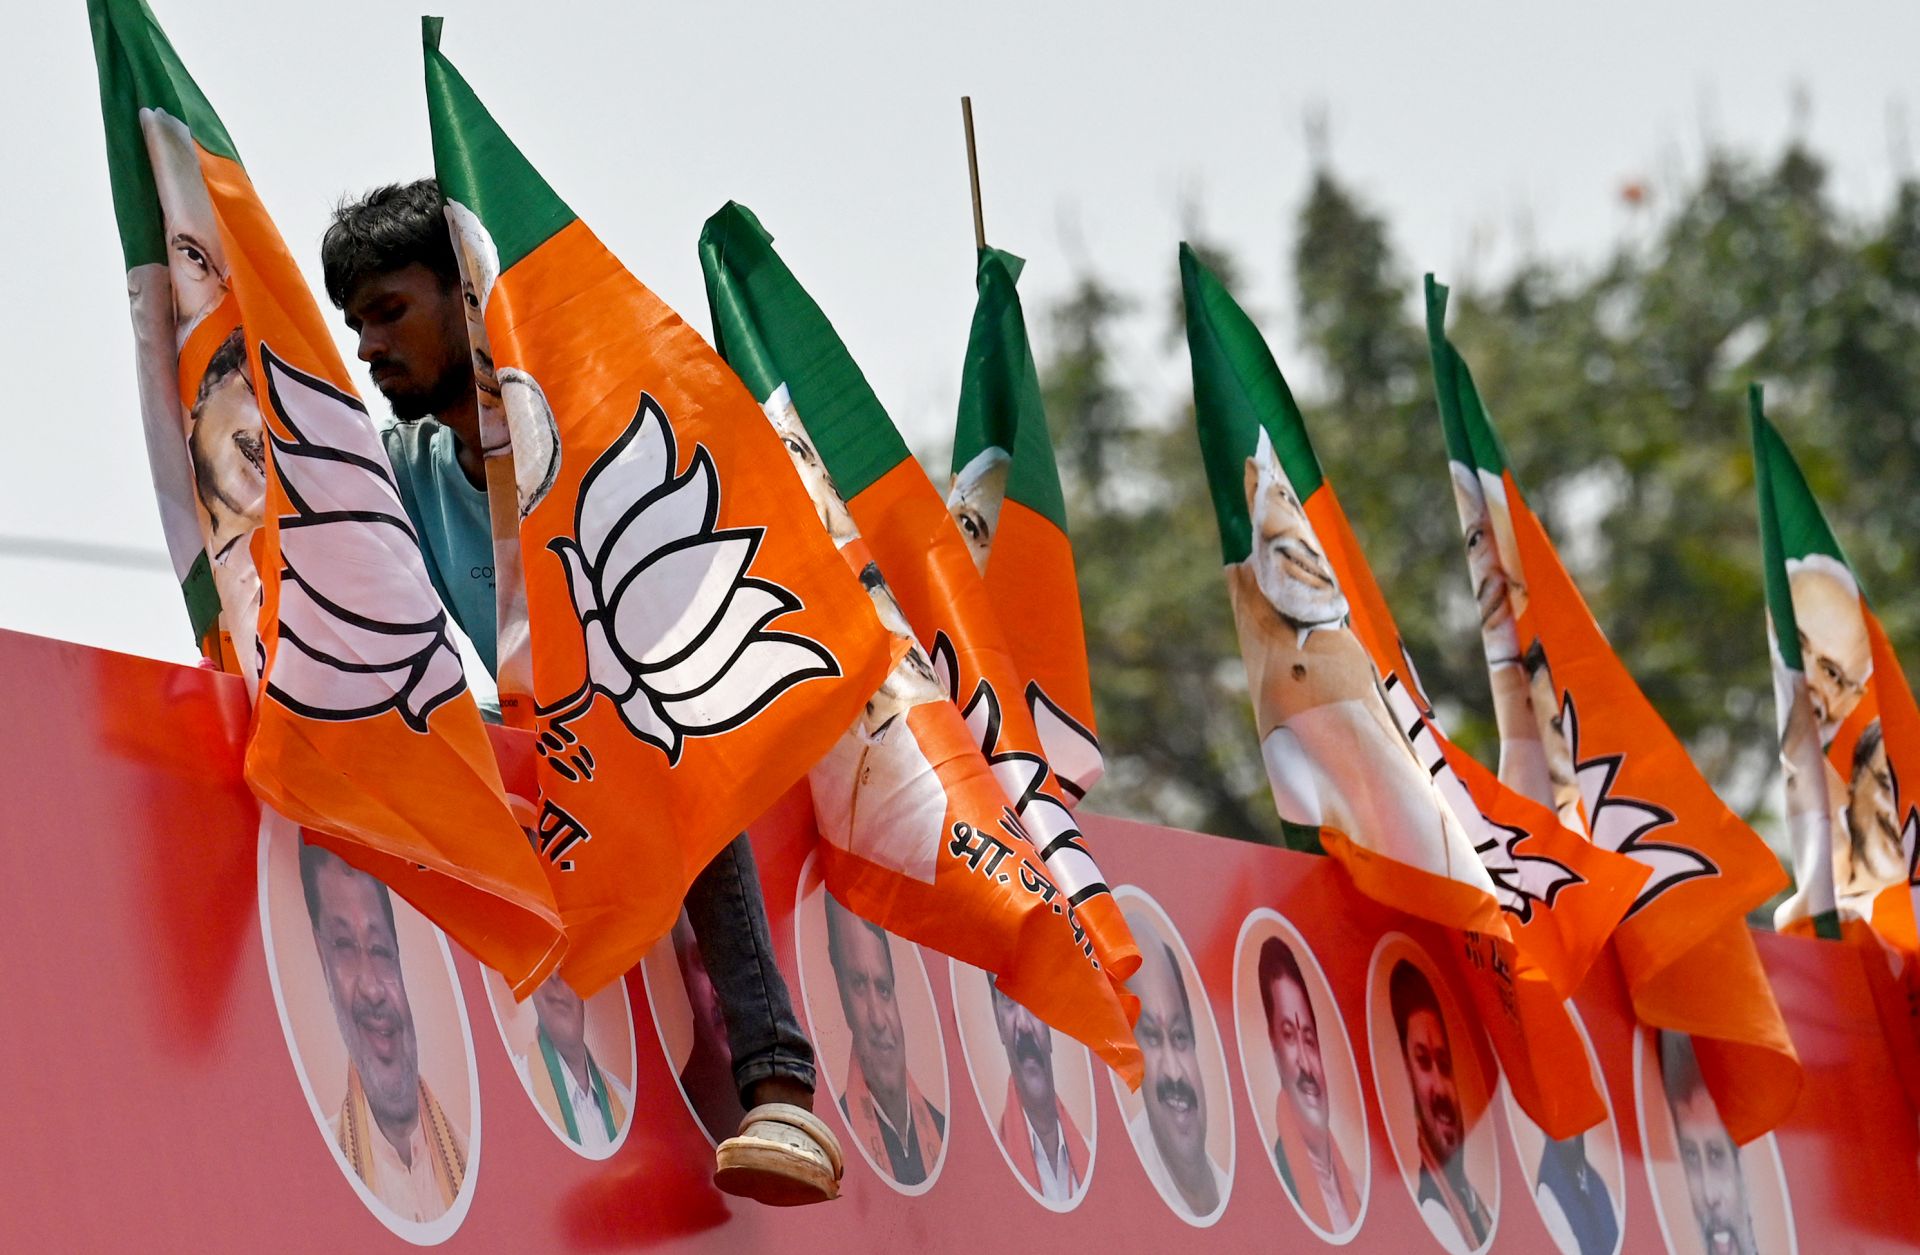 Bharatiya Janata Party flags on April 15 in the Indian city of Raipur.